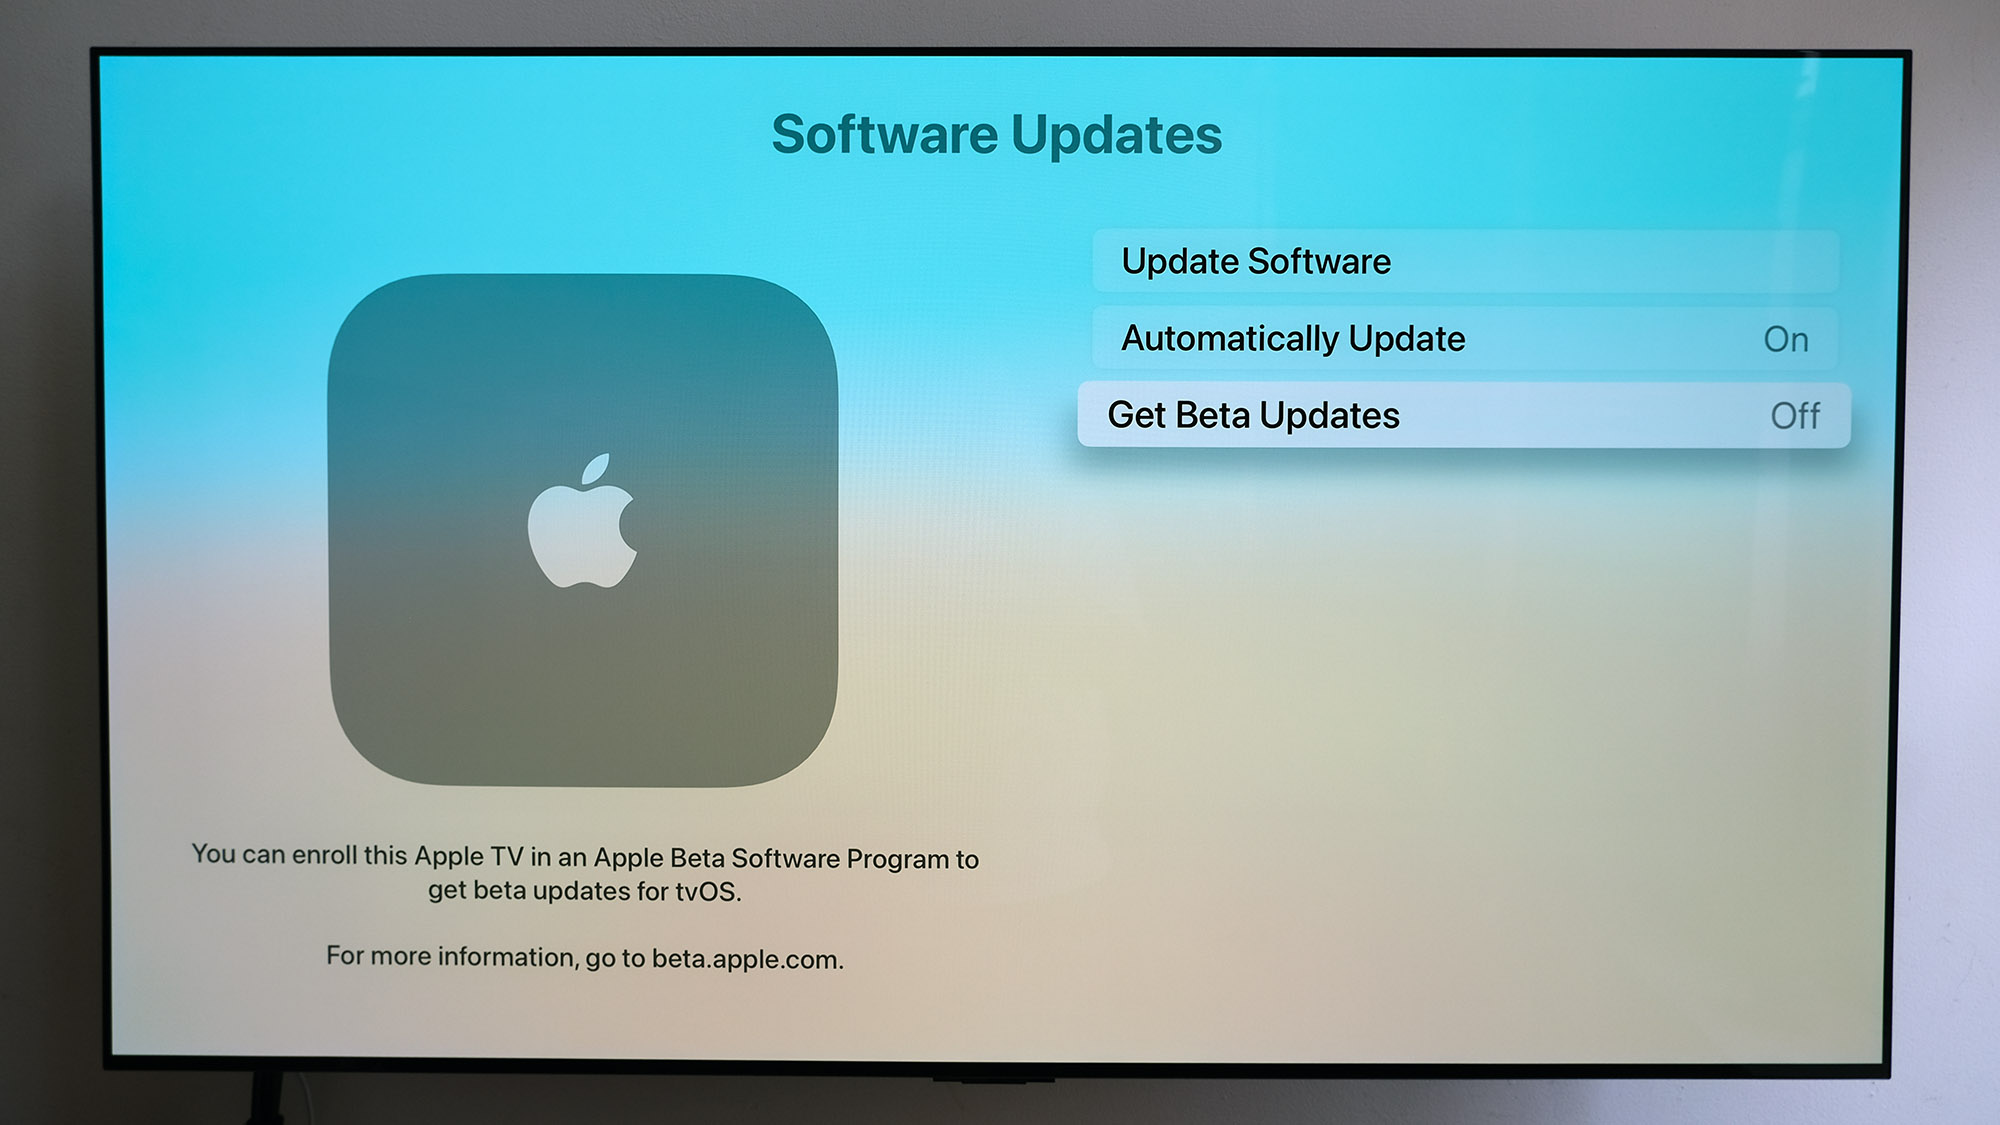 tvOS Software Updates screen, with the Get Beta Updates button selected